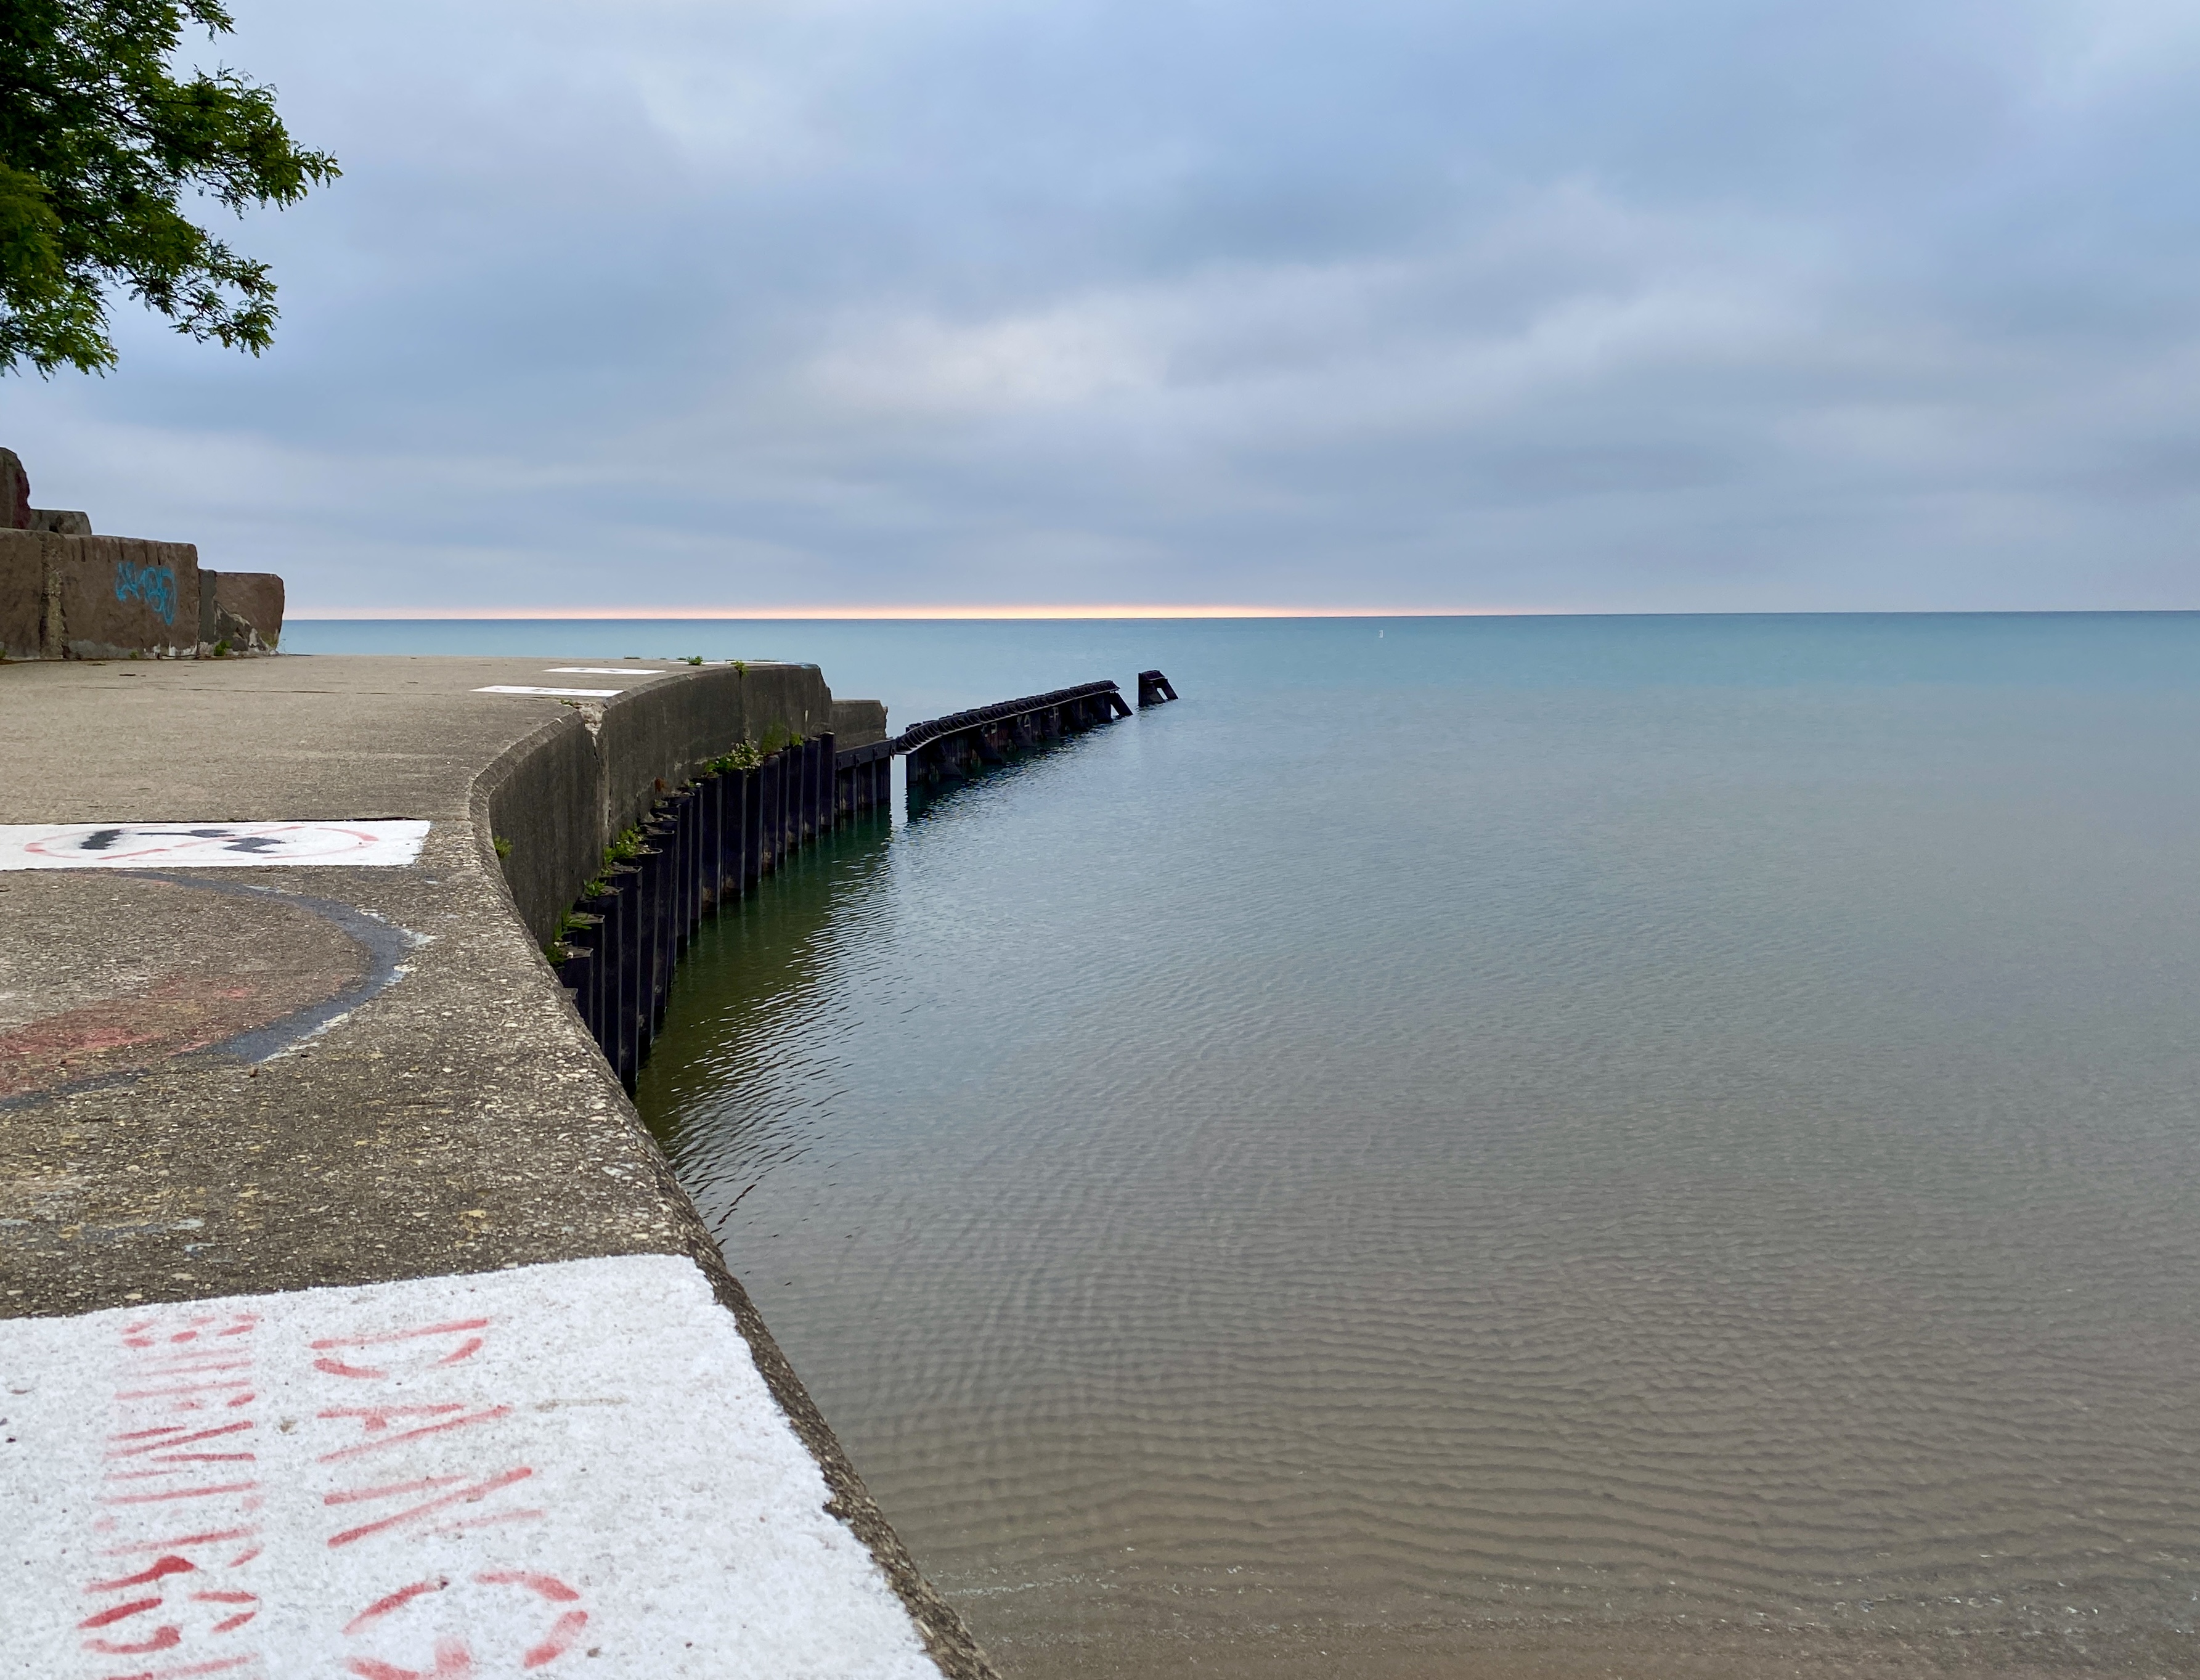 Horizon of a large lake with a clouded sky, a thin strip of orange sunrise, and a curve of concrete walkway to the left with a green tree, the water still blue fading to sandy brown at the beach on the right